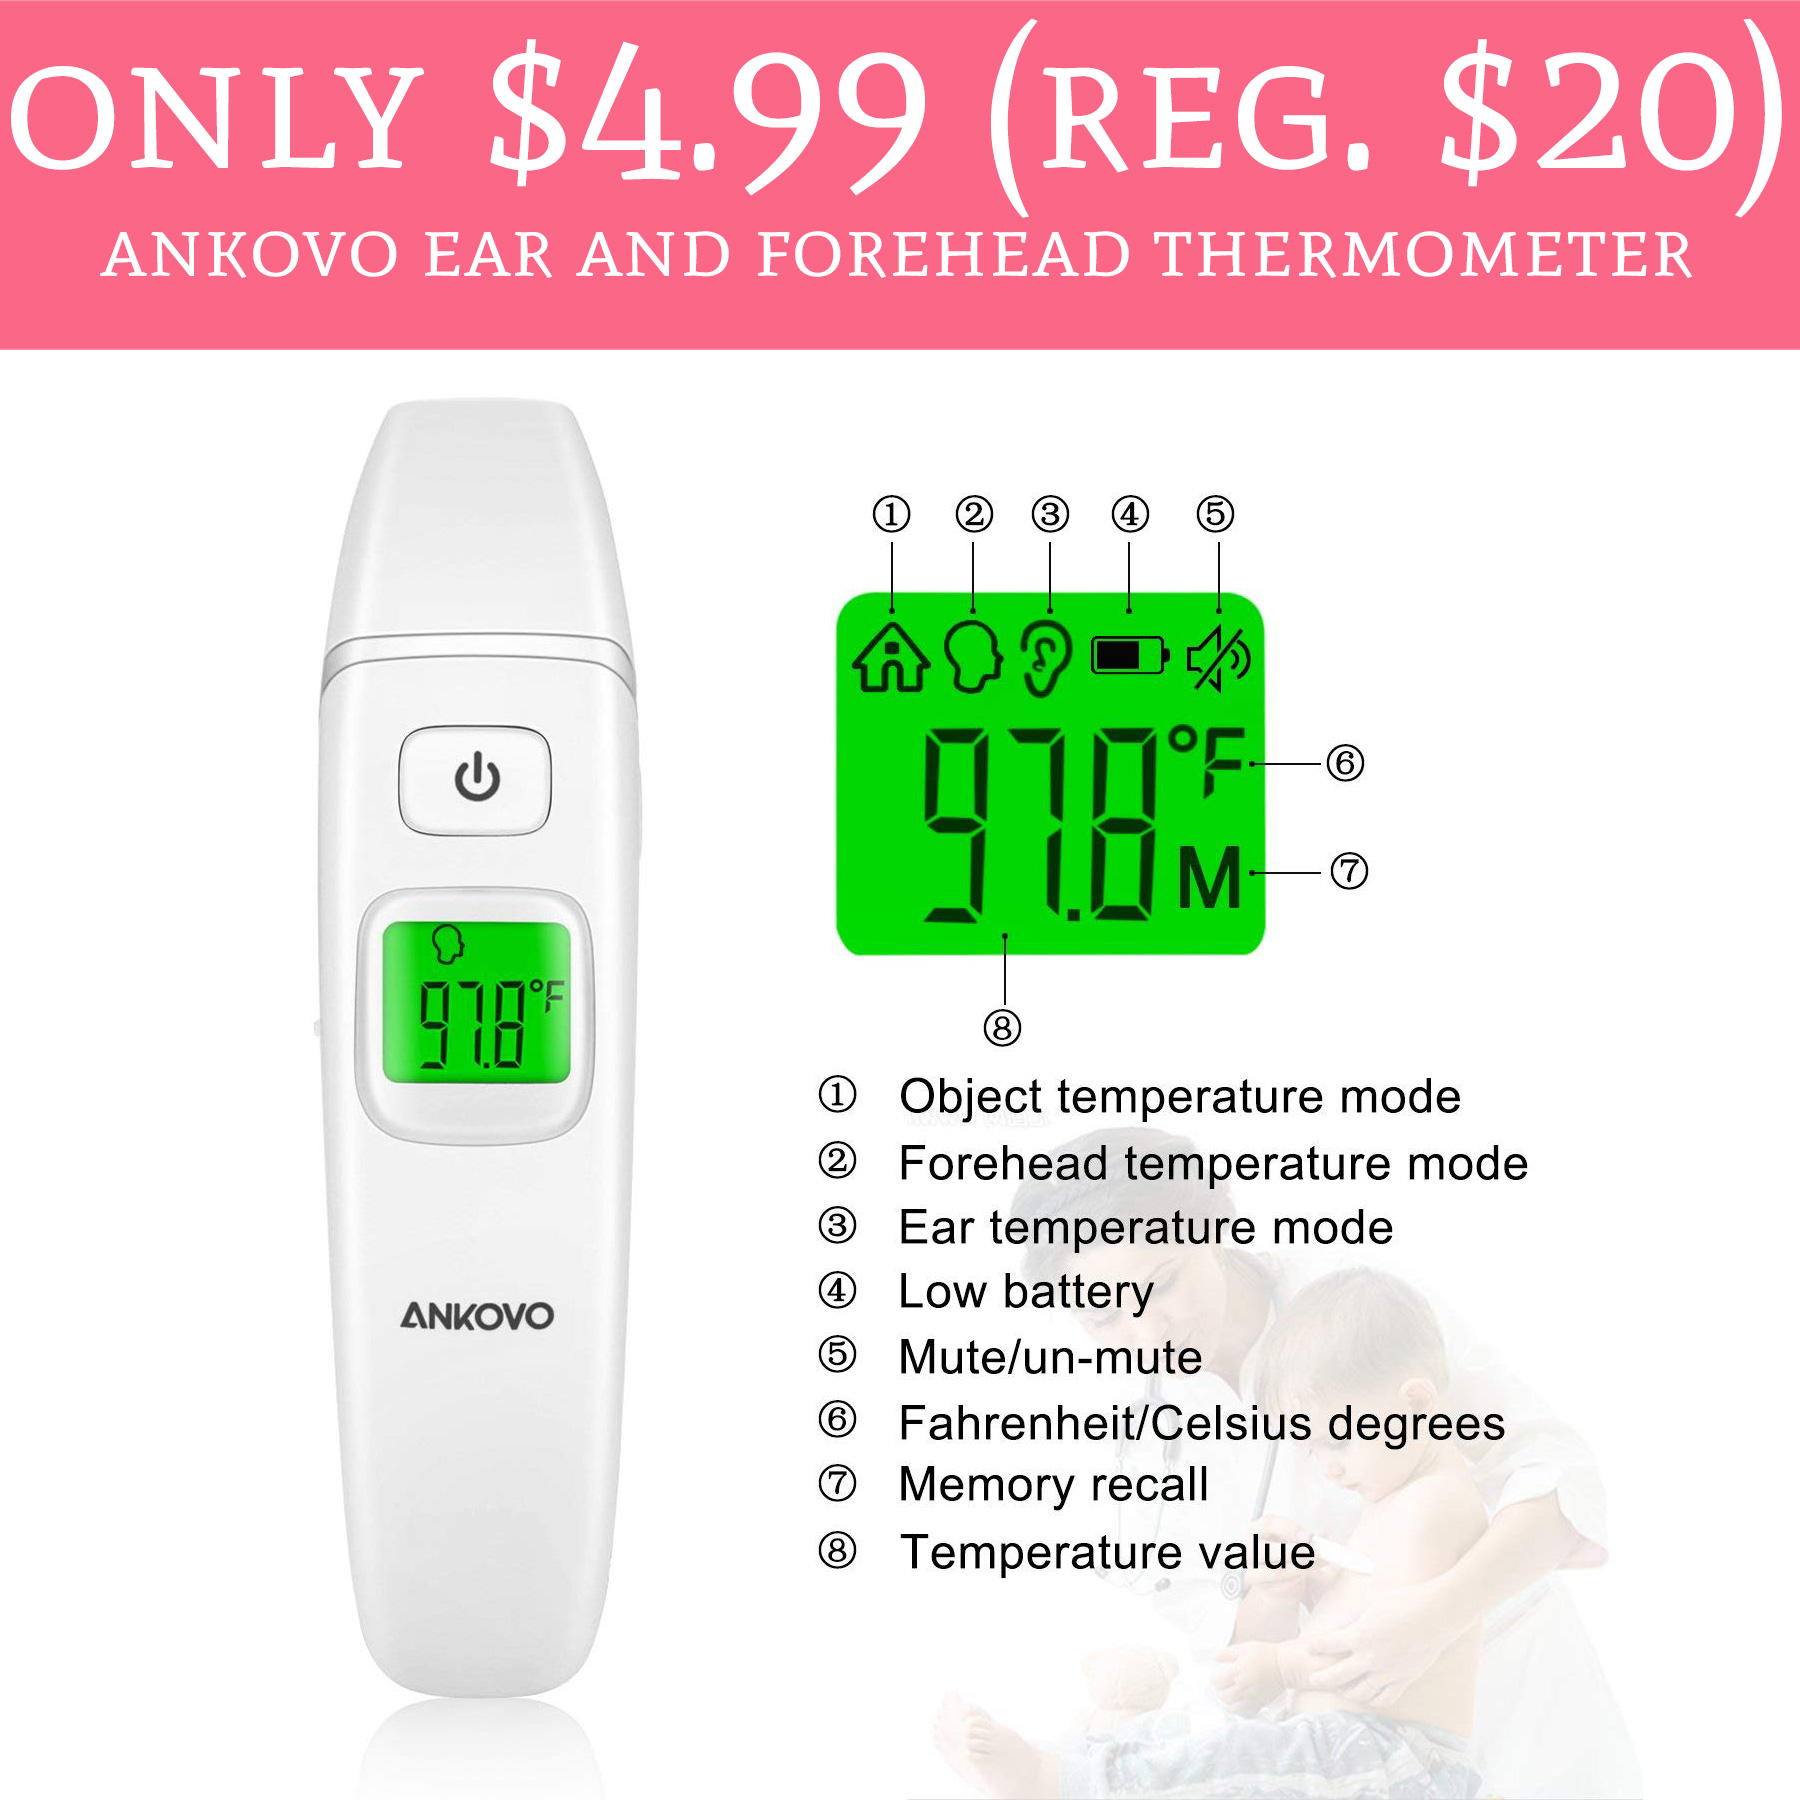 ankovo-ear-and-forehead-thermometer